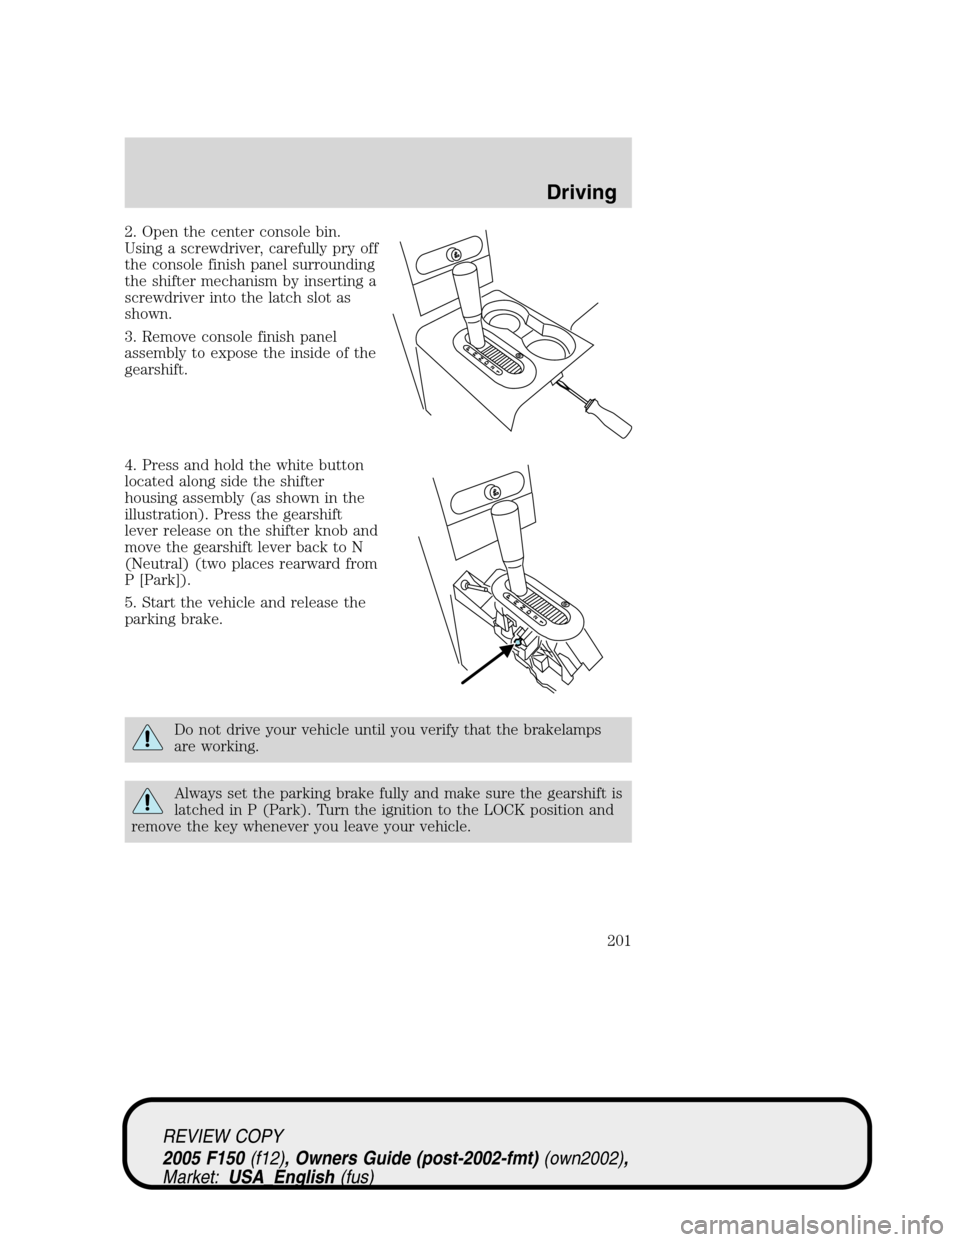 FORD F150 2005 11.G Owners Manual 2. Open the center console bin.
Using a screwdriver, carefully pry off
the console finish panel surrounding
the shifter mechanism by inserting a
screwdriver into the latch slot as
shown.
3. Remove con